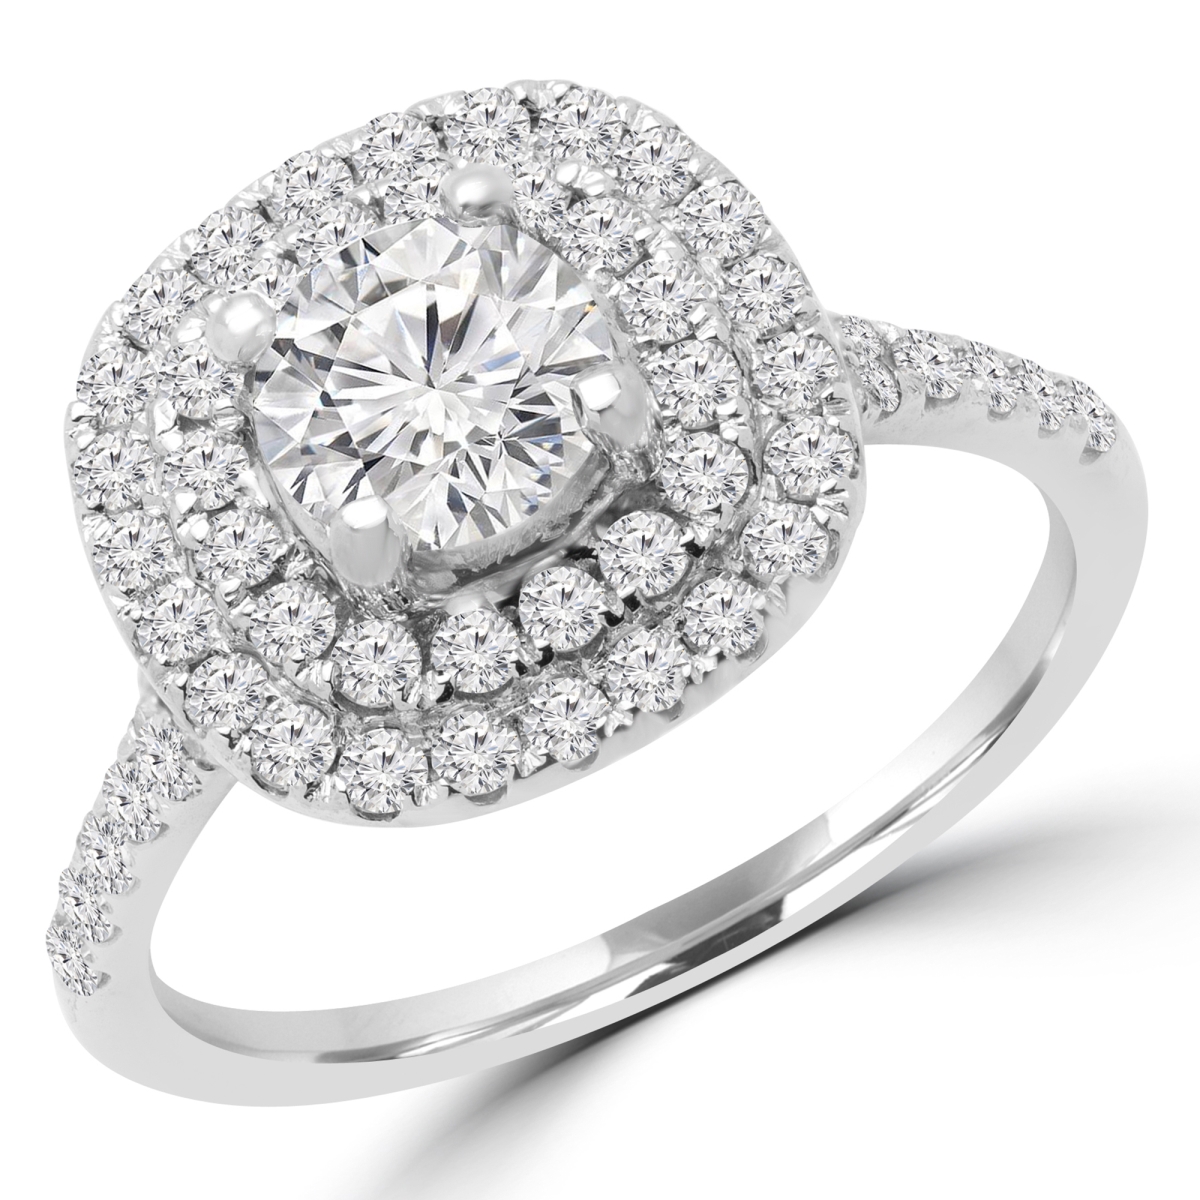 Picture of Majesty Diamonds MD170293 1.4 CTW Round Diamond Double Halo Engagement Ring in 14K